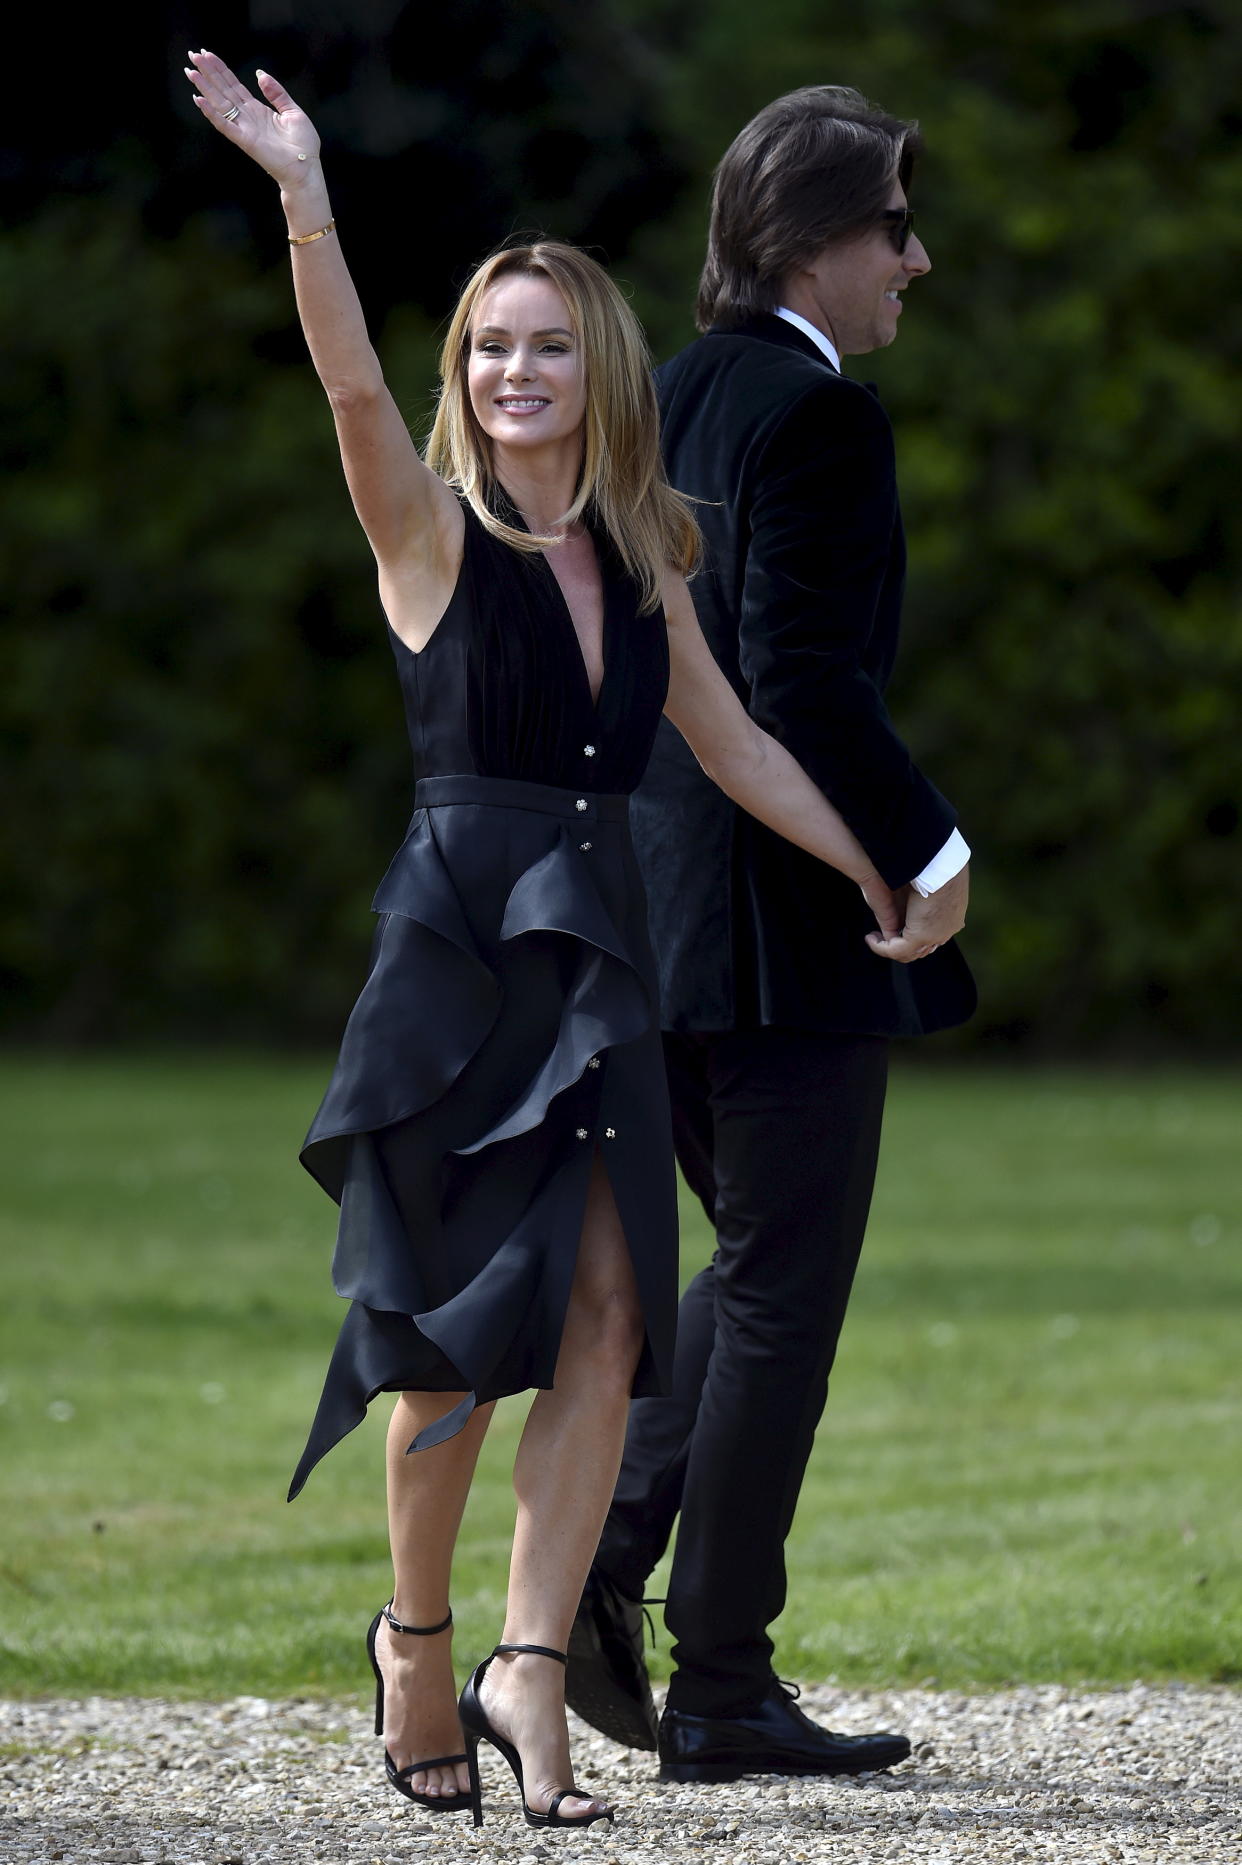 Guests, British television presenter Amanda Holden (L) and her husband Chris Hughes arrive for the wedding of British singer and former member of the band Spice Girls, Geri Halliwell and Christian Horner, Red Bull Formula One team principal, at St. Mary's Church at Woburn in southern England May 15, 2015. REUTERS/Toby Melville